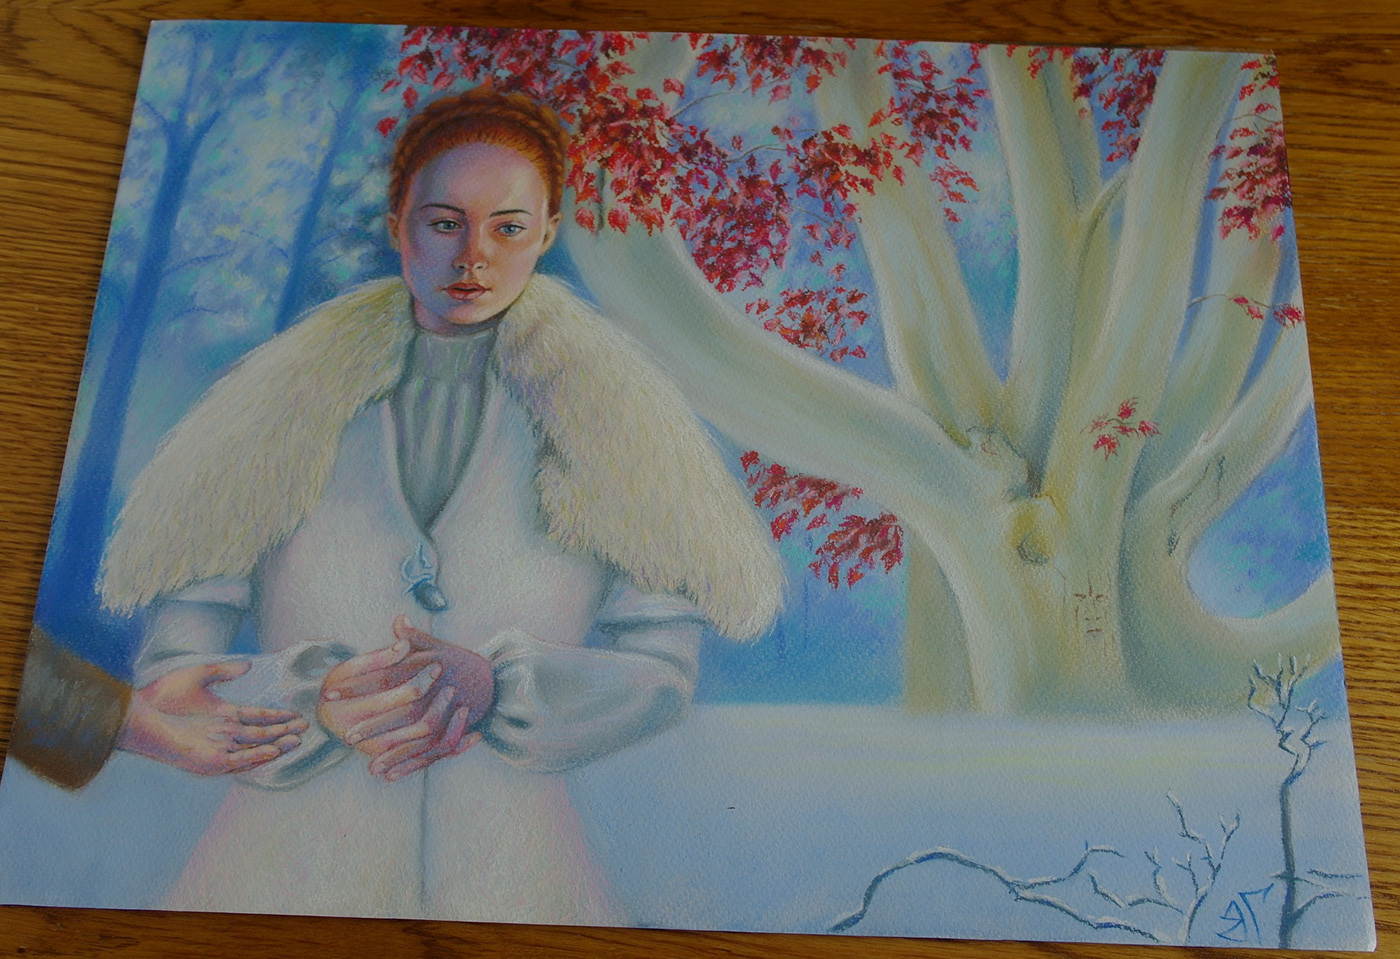 Game of Thrones ice and fire sansa stark sophie turner george martin Winterfell marriage Westeros Tree  pasrel art